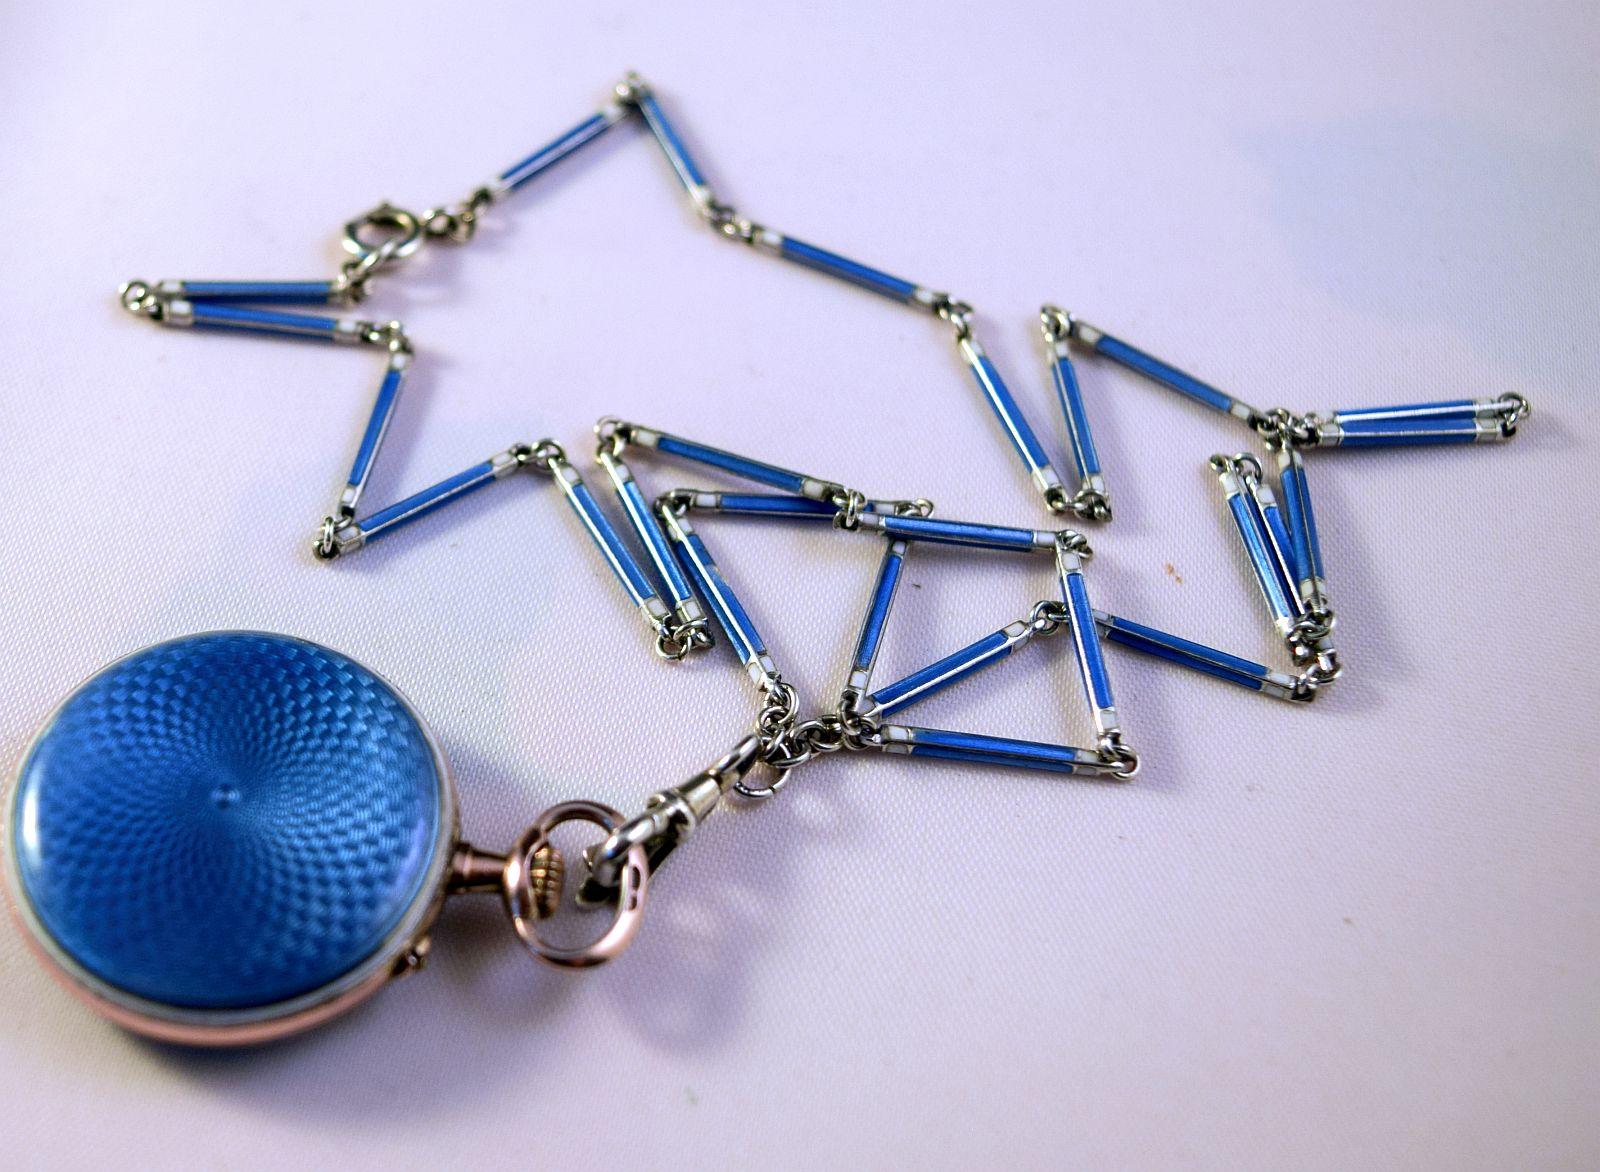 Early 20th Century European Silver Blue enamel Ladies Fob Watch
on a blue matching enamel link chain.
Vey good condition for the age watch is in very good running condition.
Inside back is stamped with silver hall marks 0.935
Which is the purest